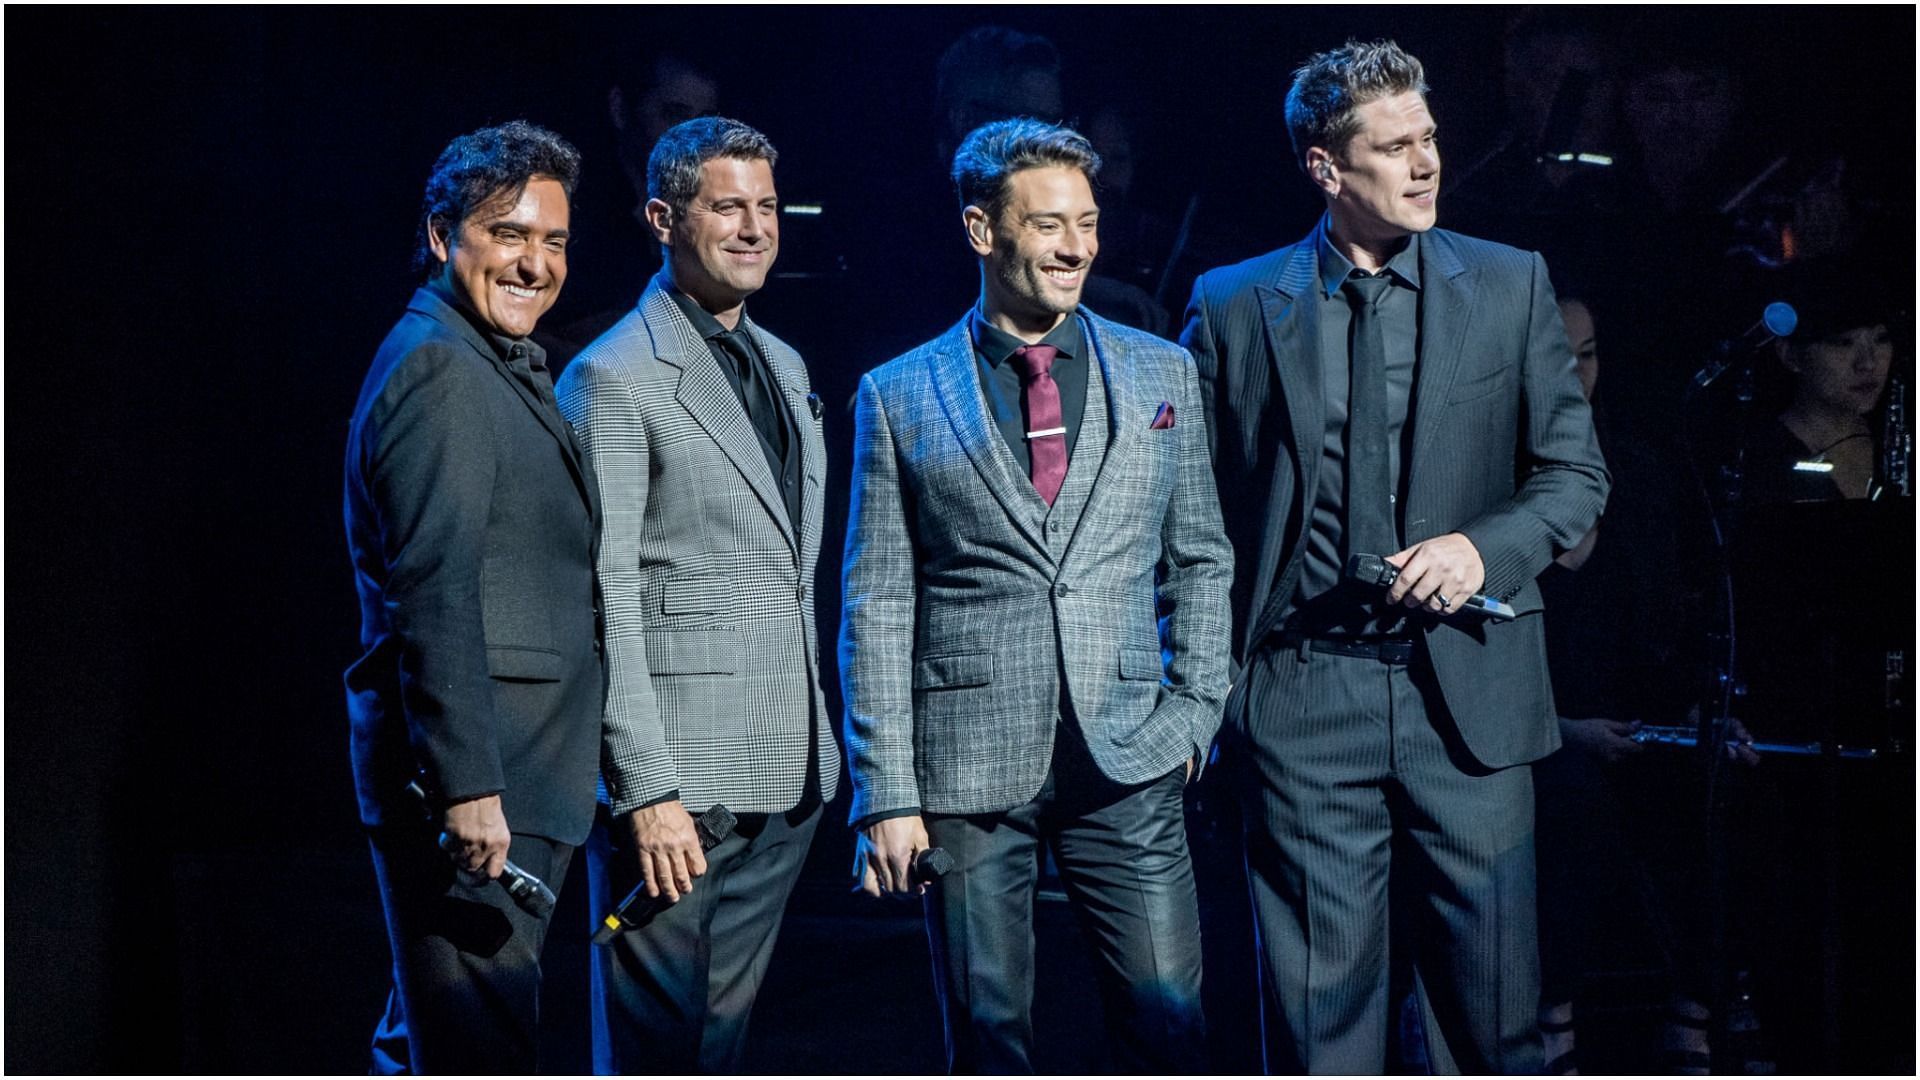 Carlos Marin, Sebastien Izambard, Urs Buhler and David Miller of Il Divo perform at Dolby Theatre (Image by Timothy Norris via Getty Images)